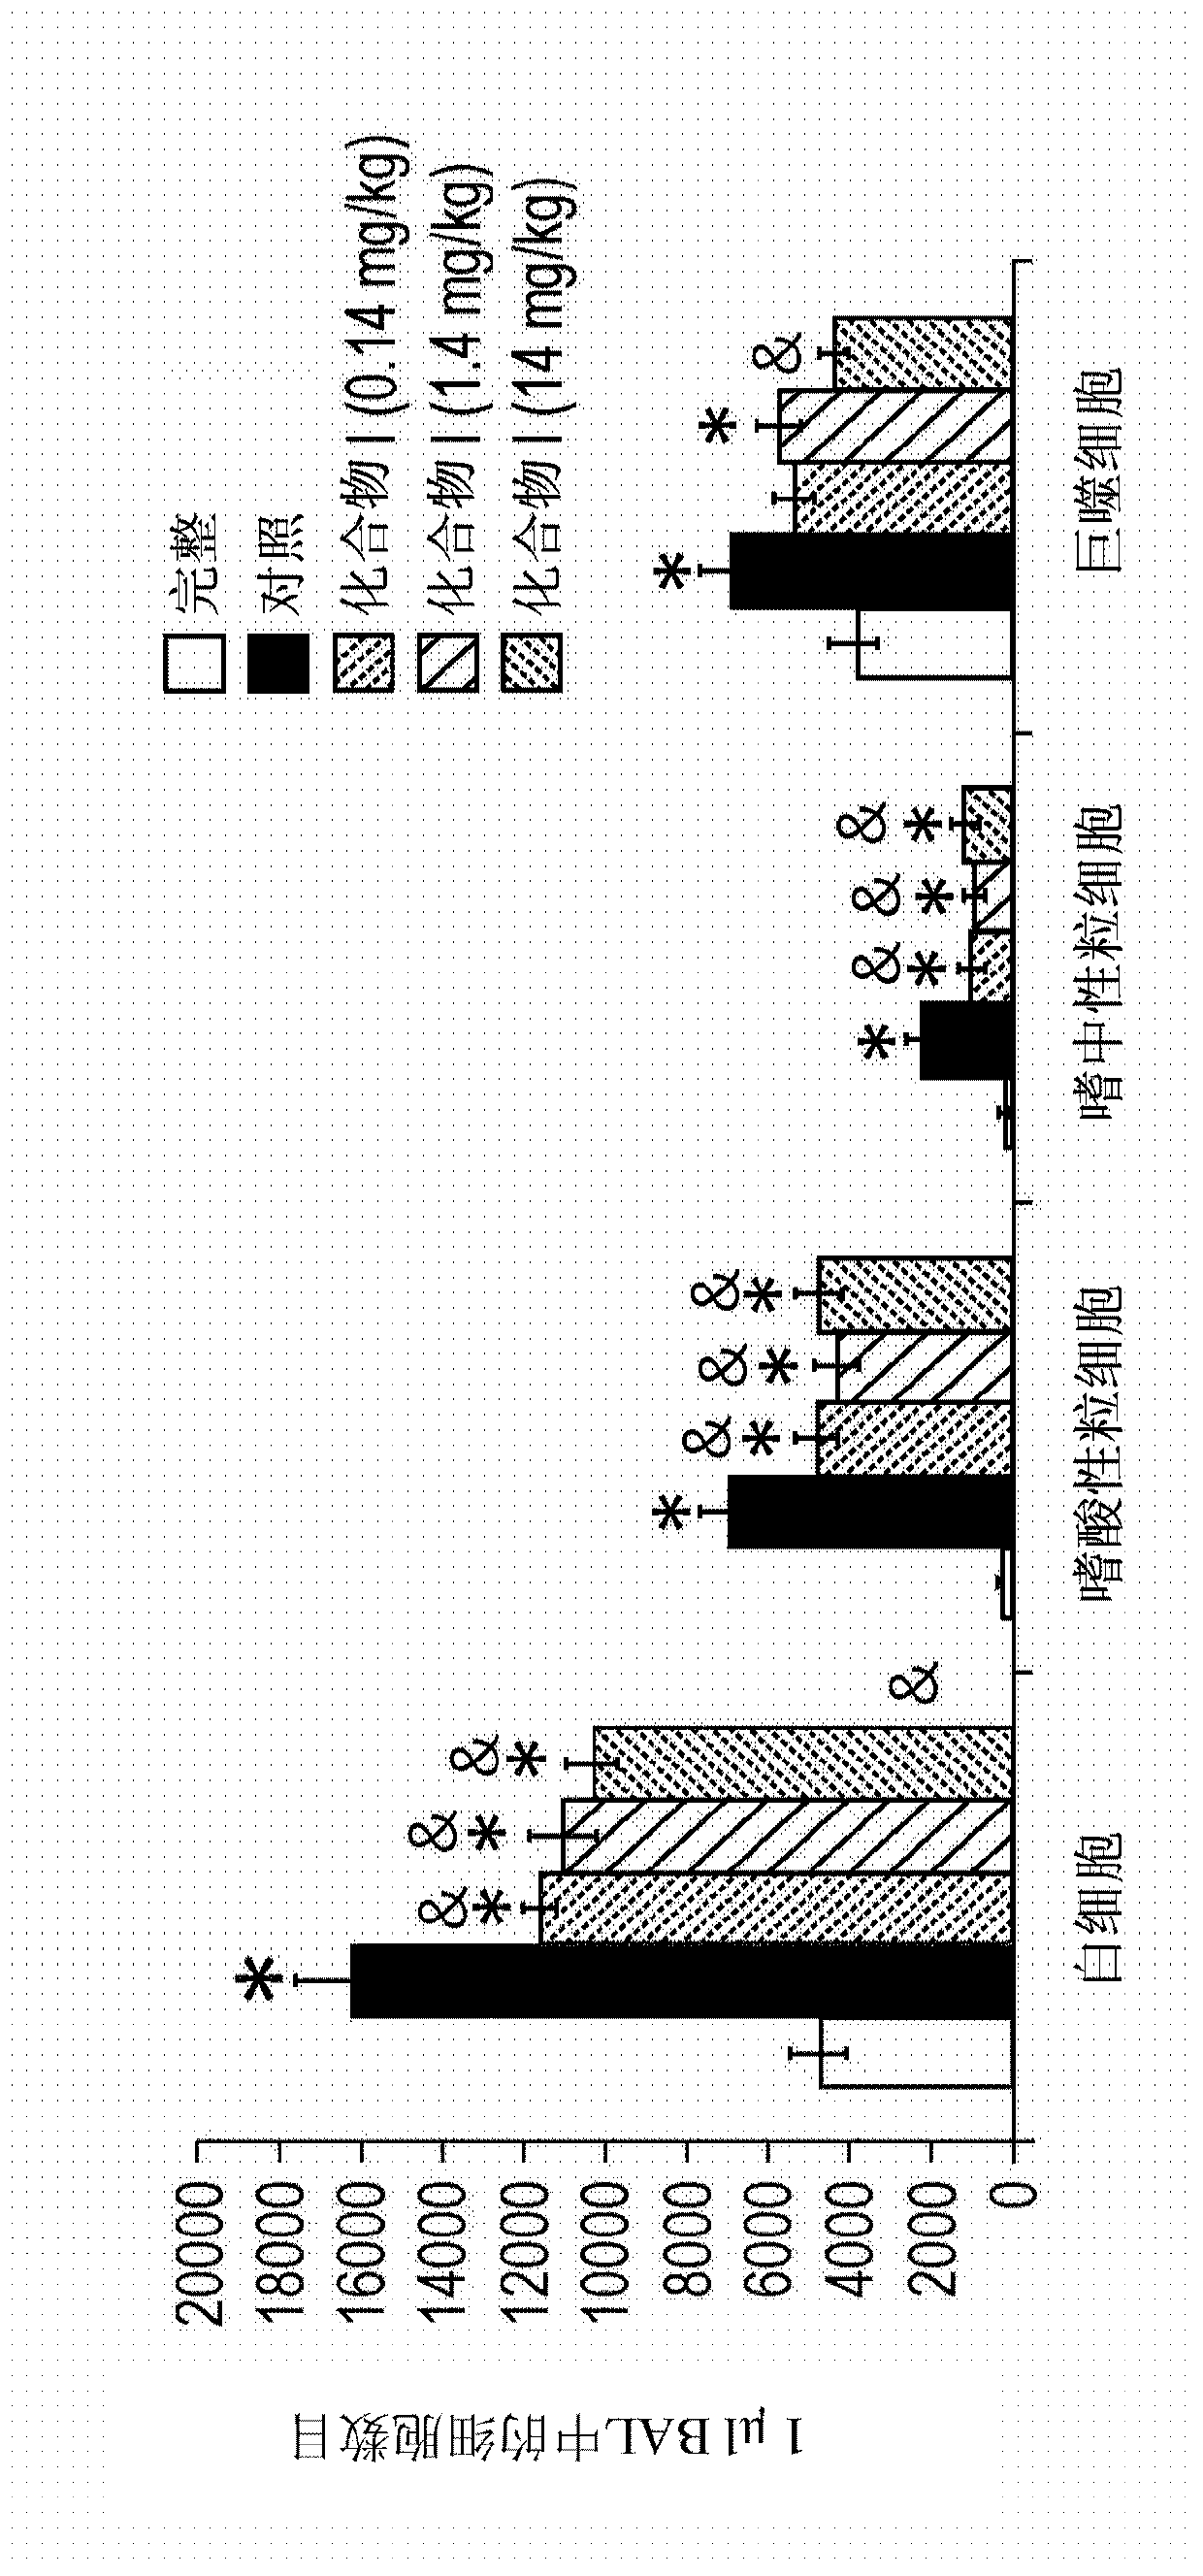 Novel glutaminyl cyclase inhibitors and the use thereof in treatment of various diseases